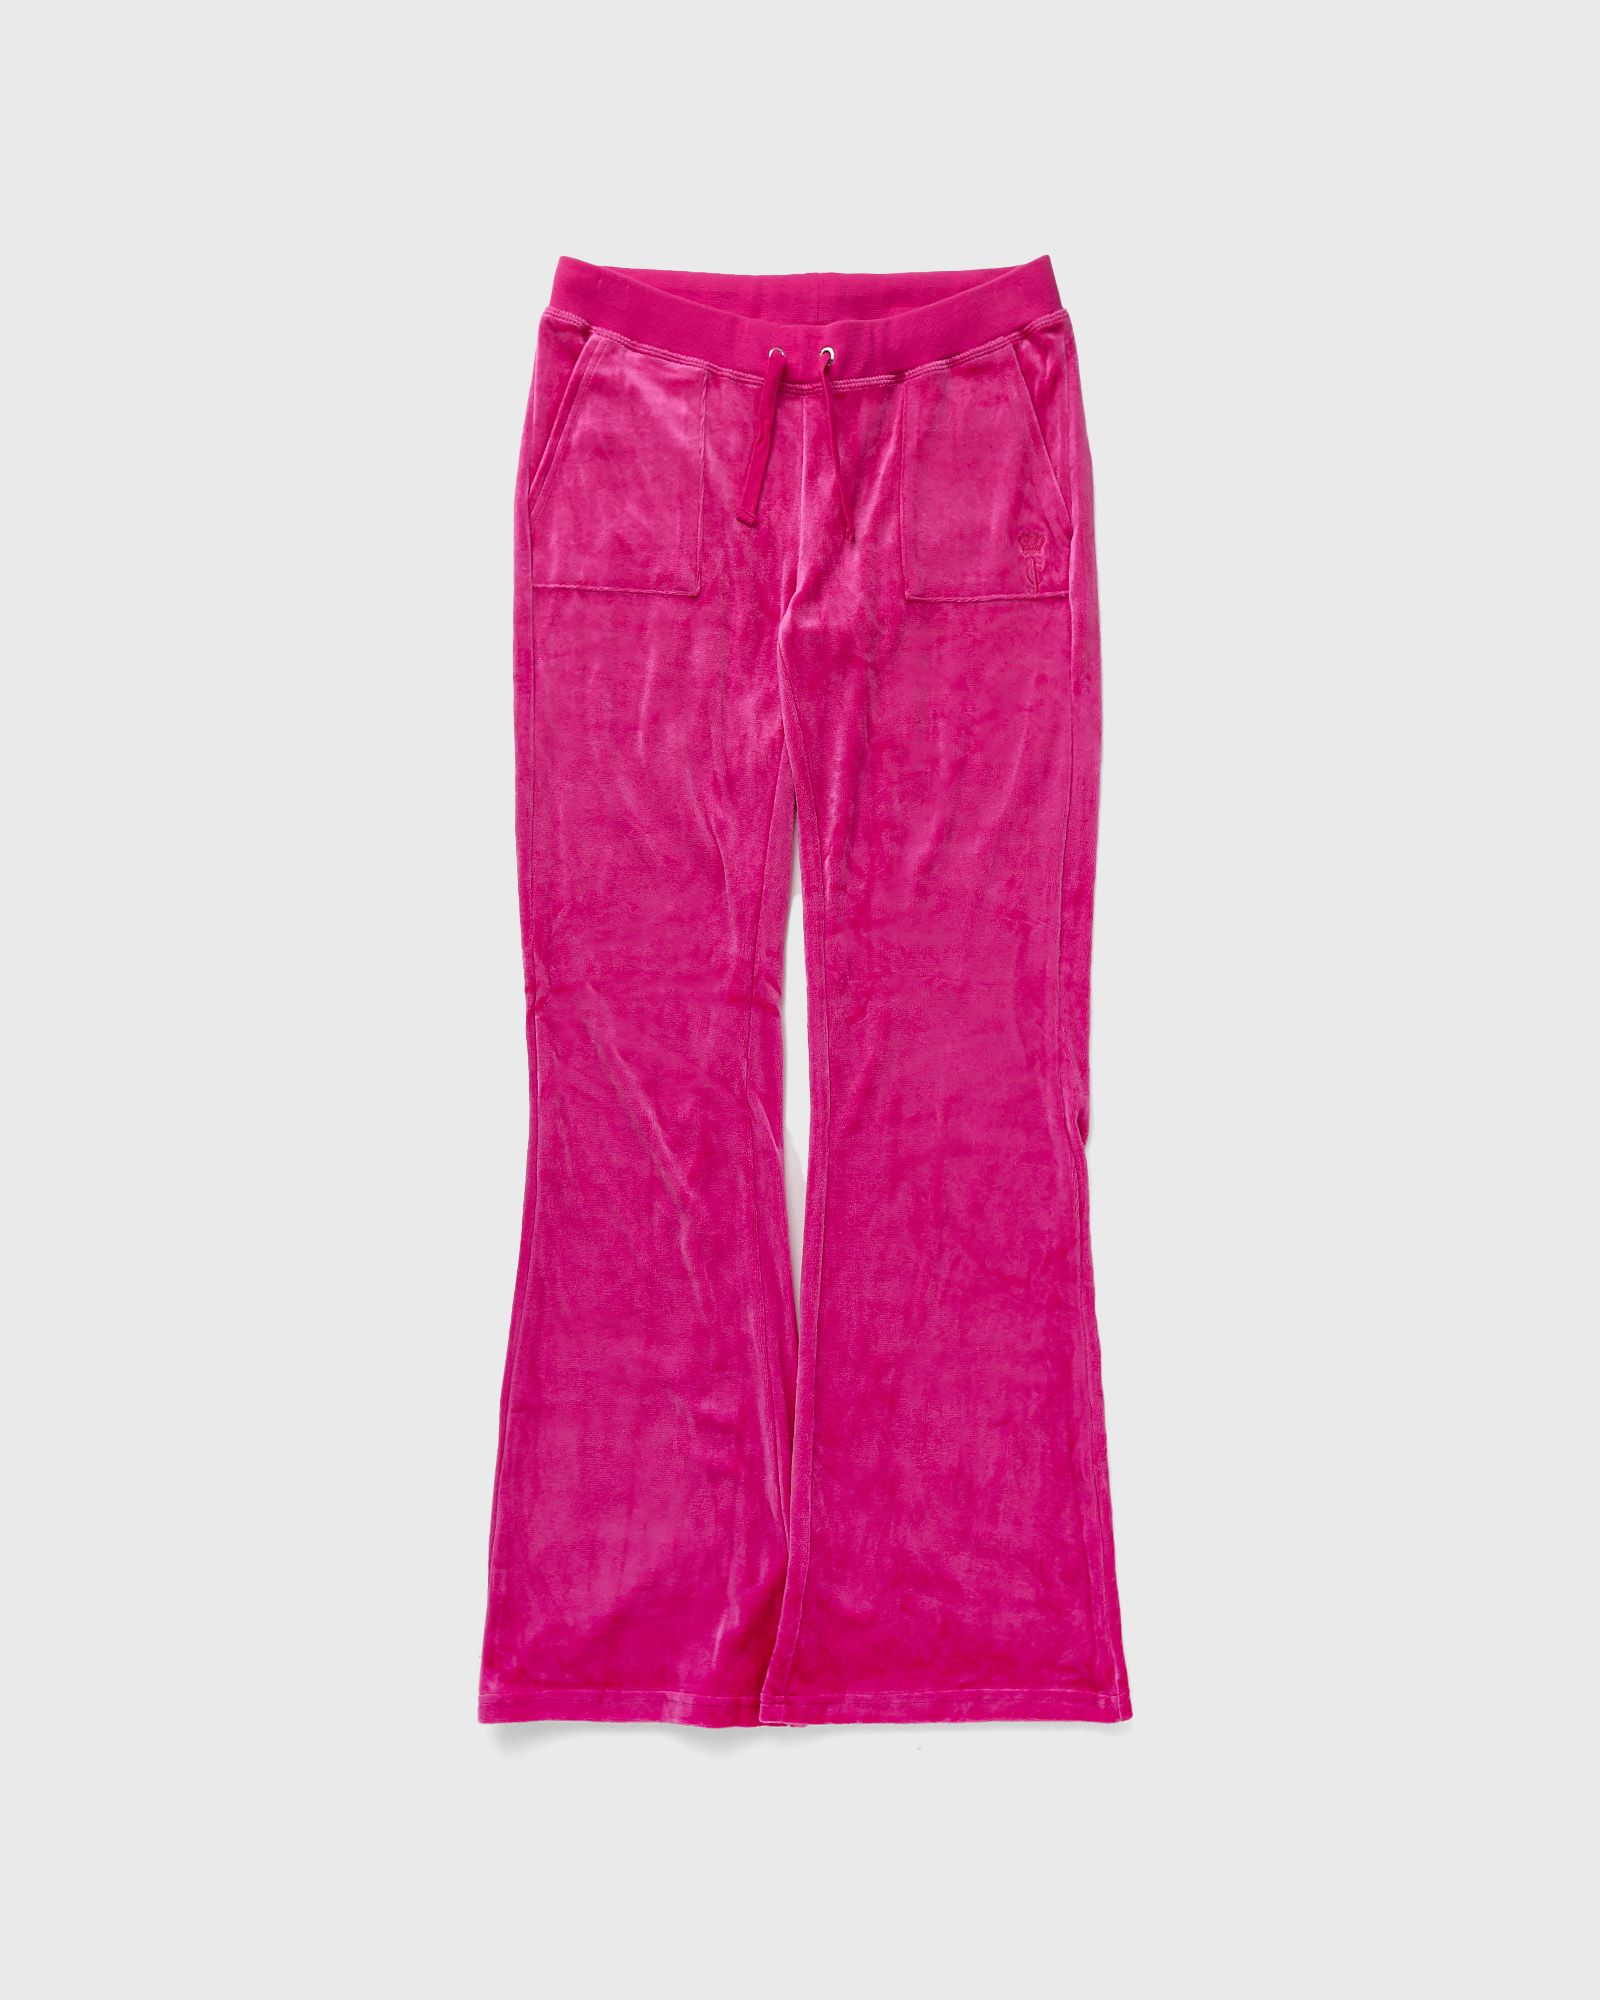 Juicy Couture - wmns caisa pant women sweatpants pink in größe:xs